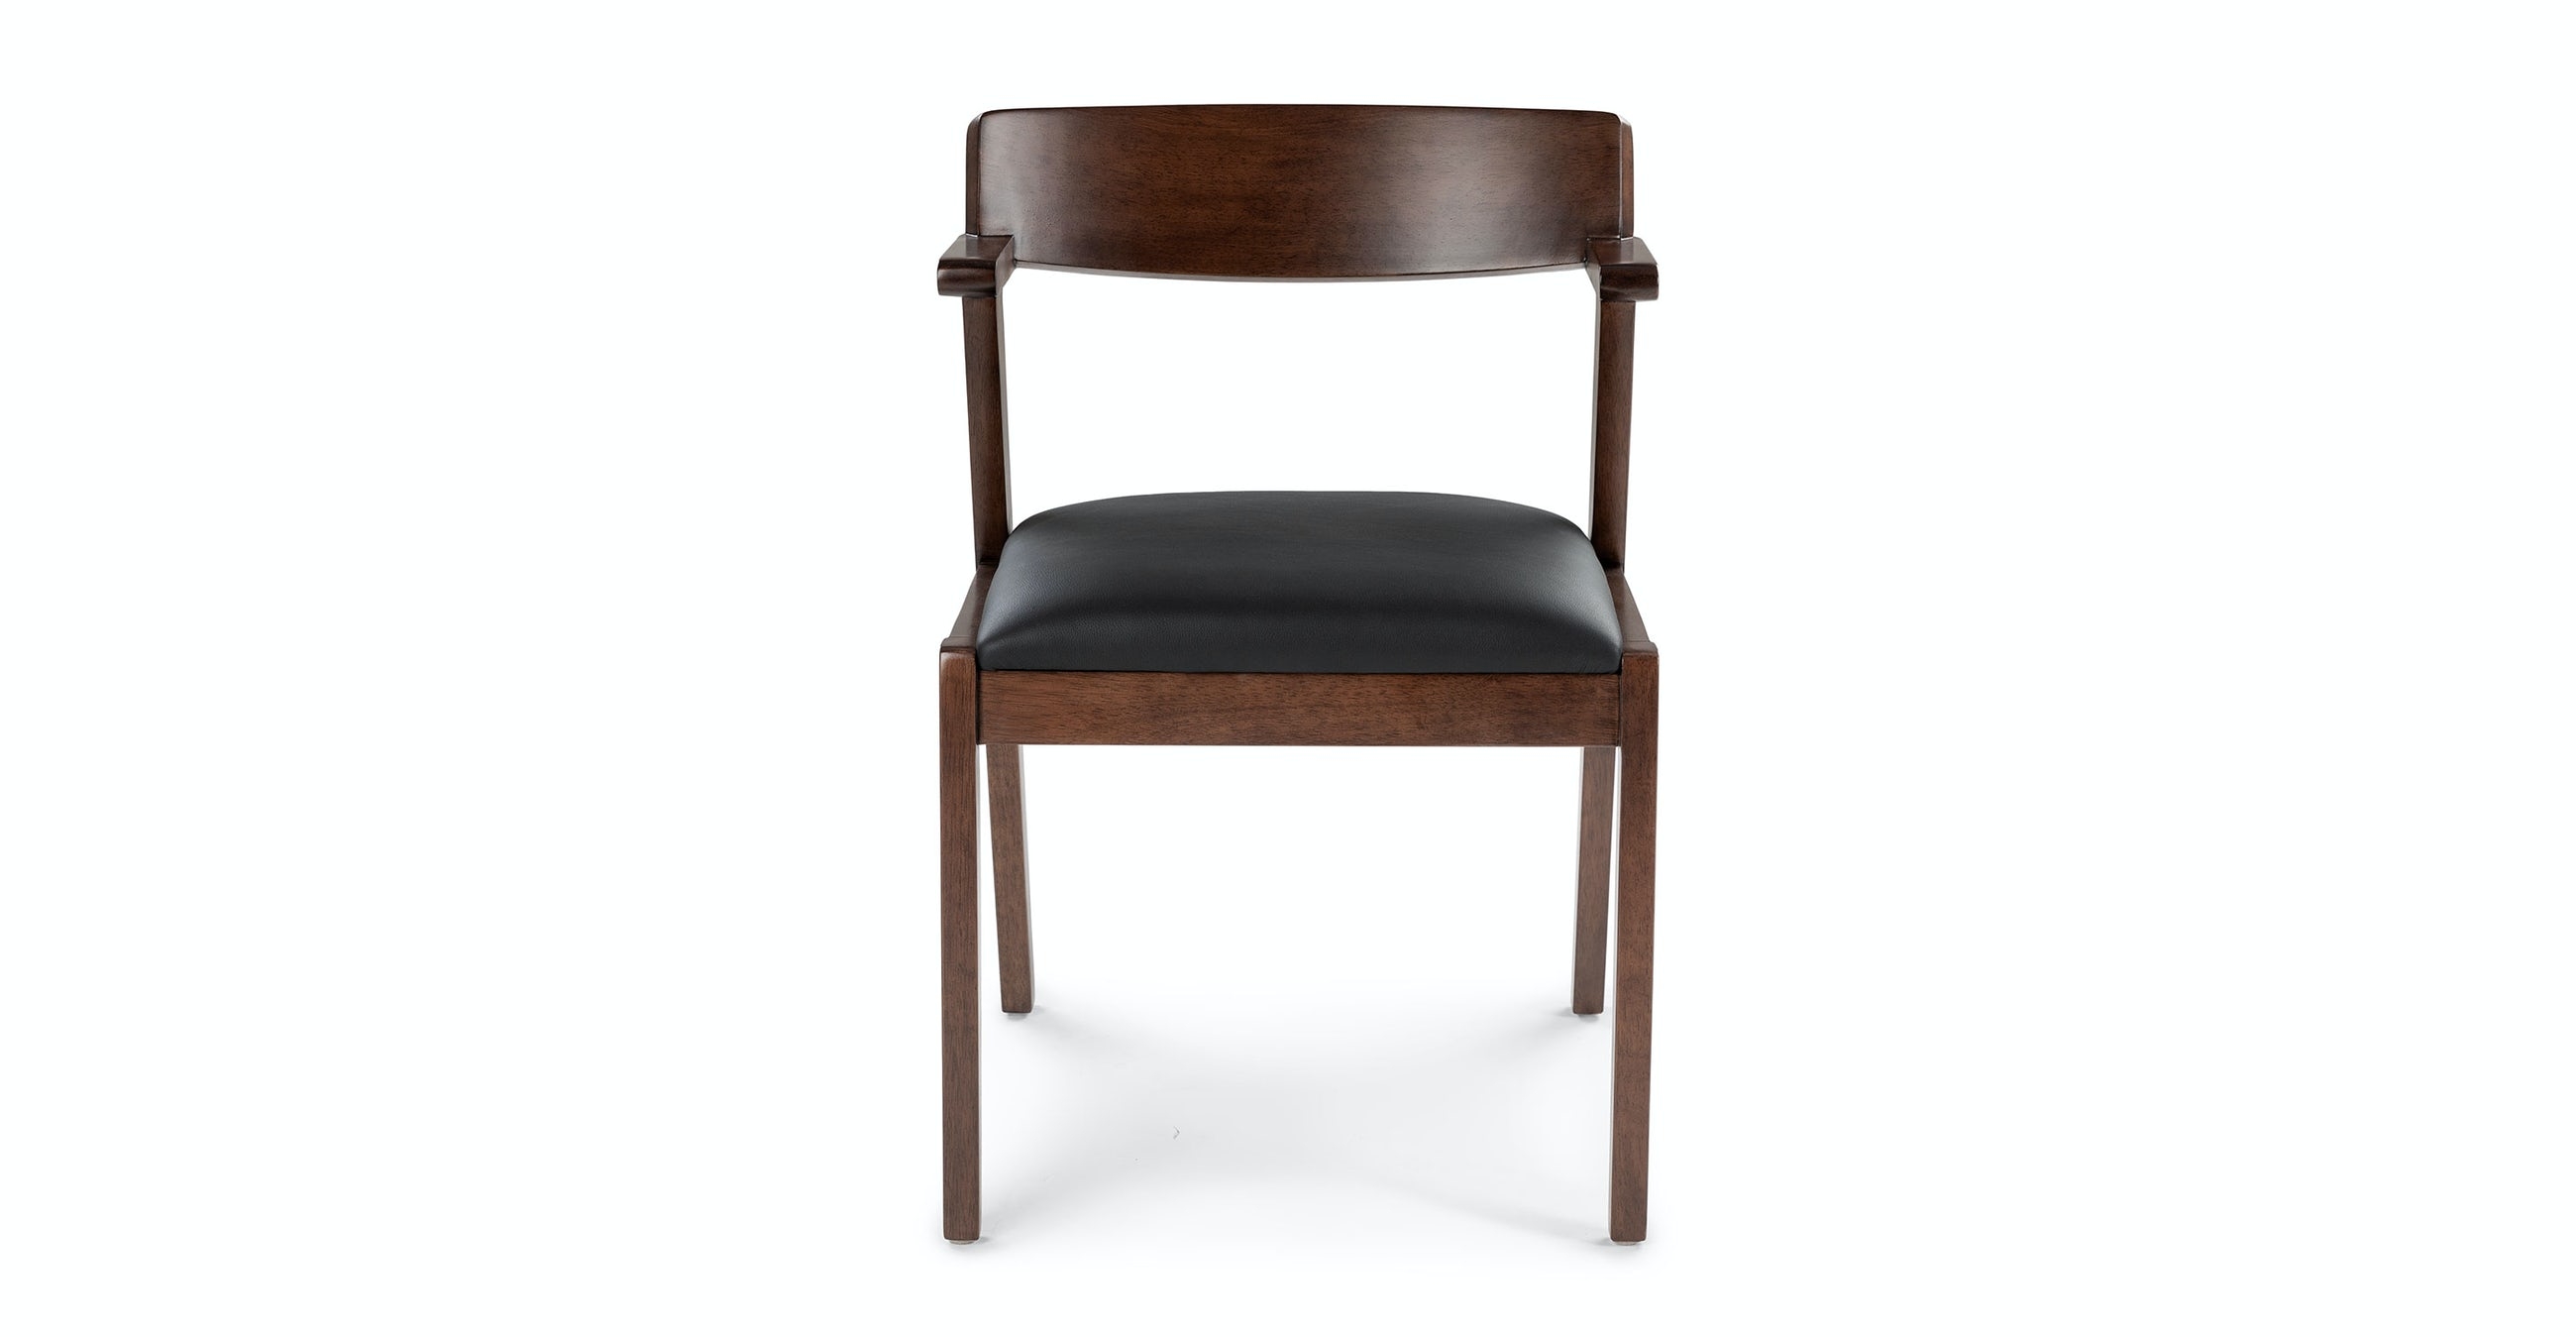 Zola Black Leather Dining Chair - Image 1